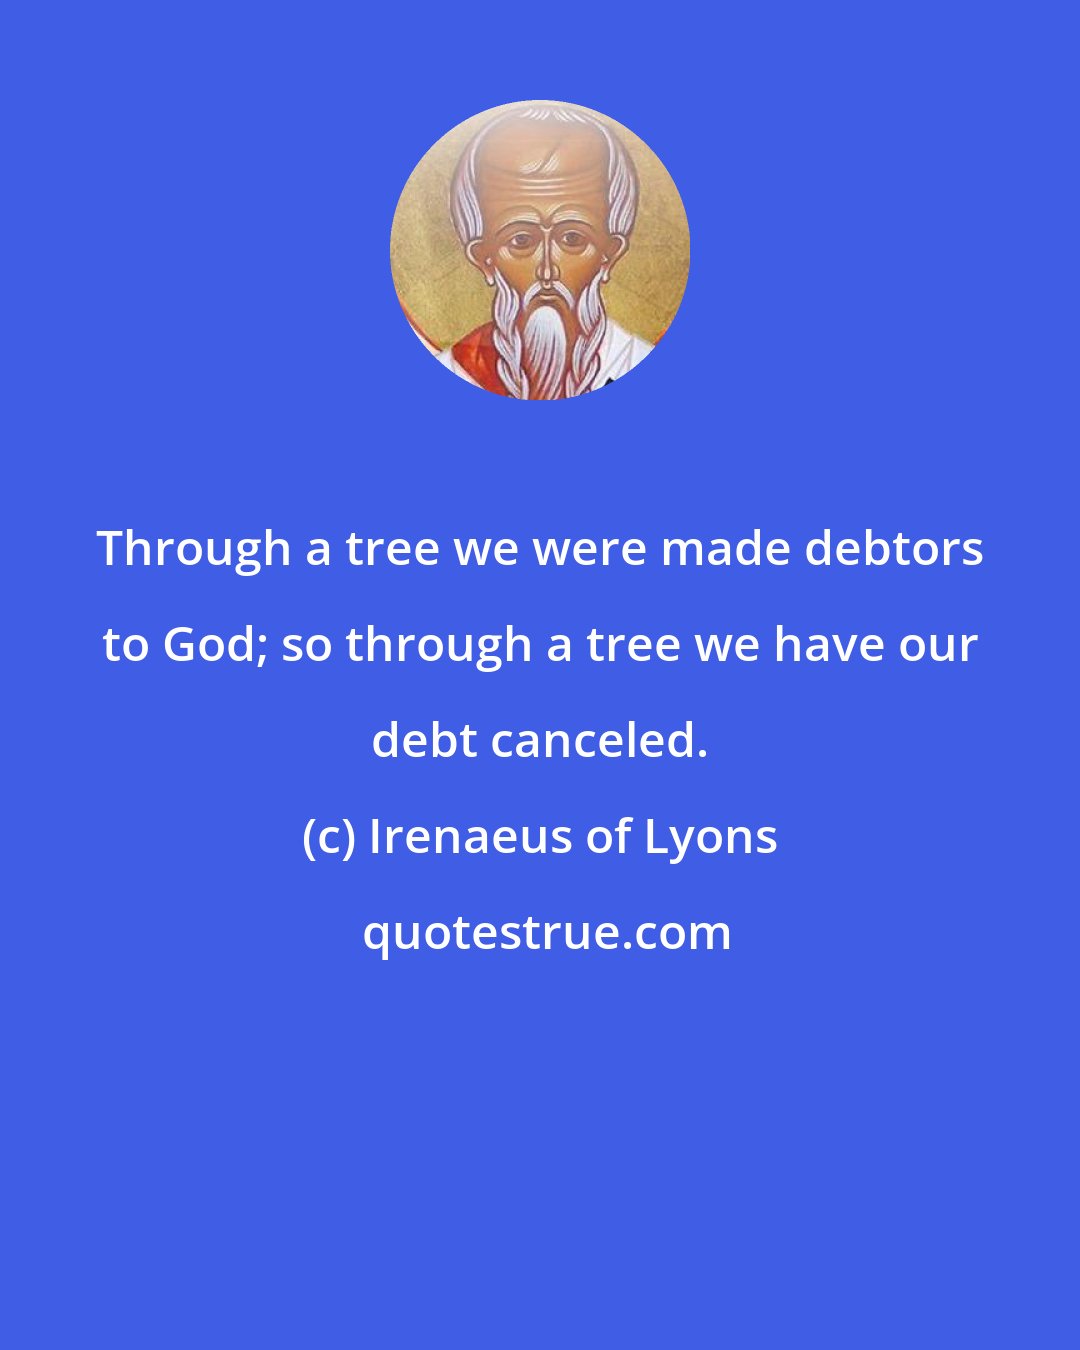 Irenaeus of Lyons: Through a tree we were made debtors to God; so through a tree we have our debt canceled.